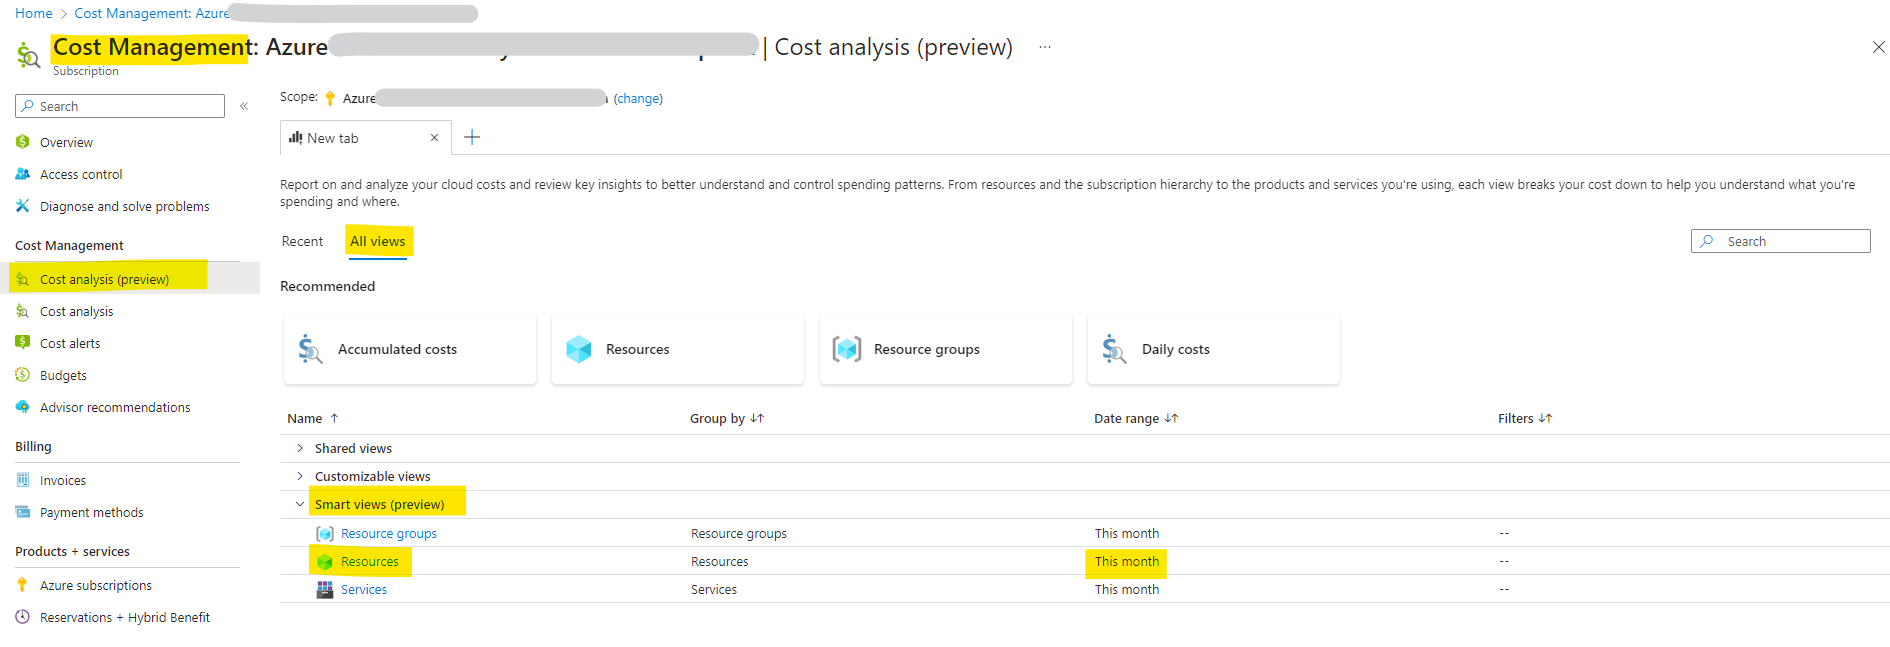 How much does a NAT gateway cost in Azure?